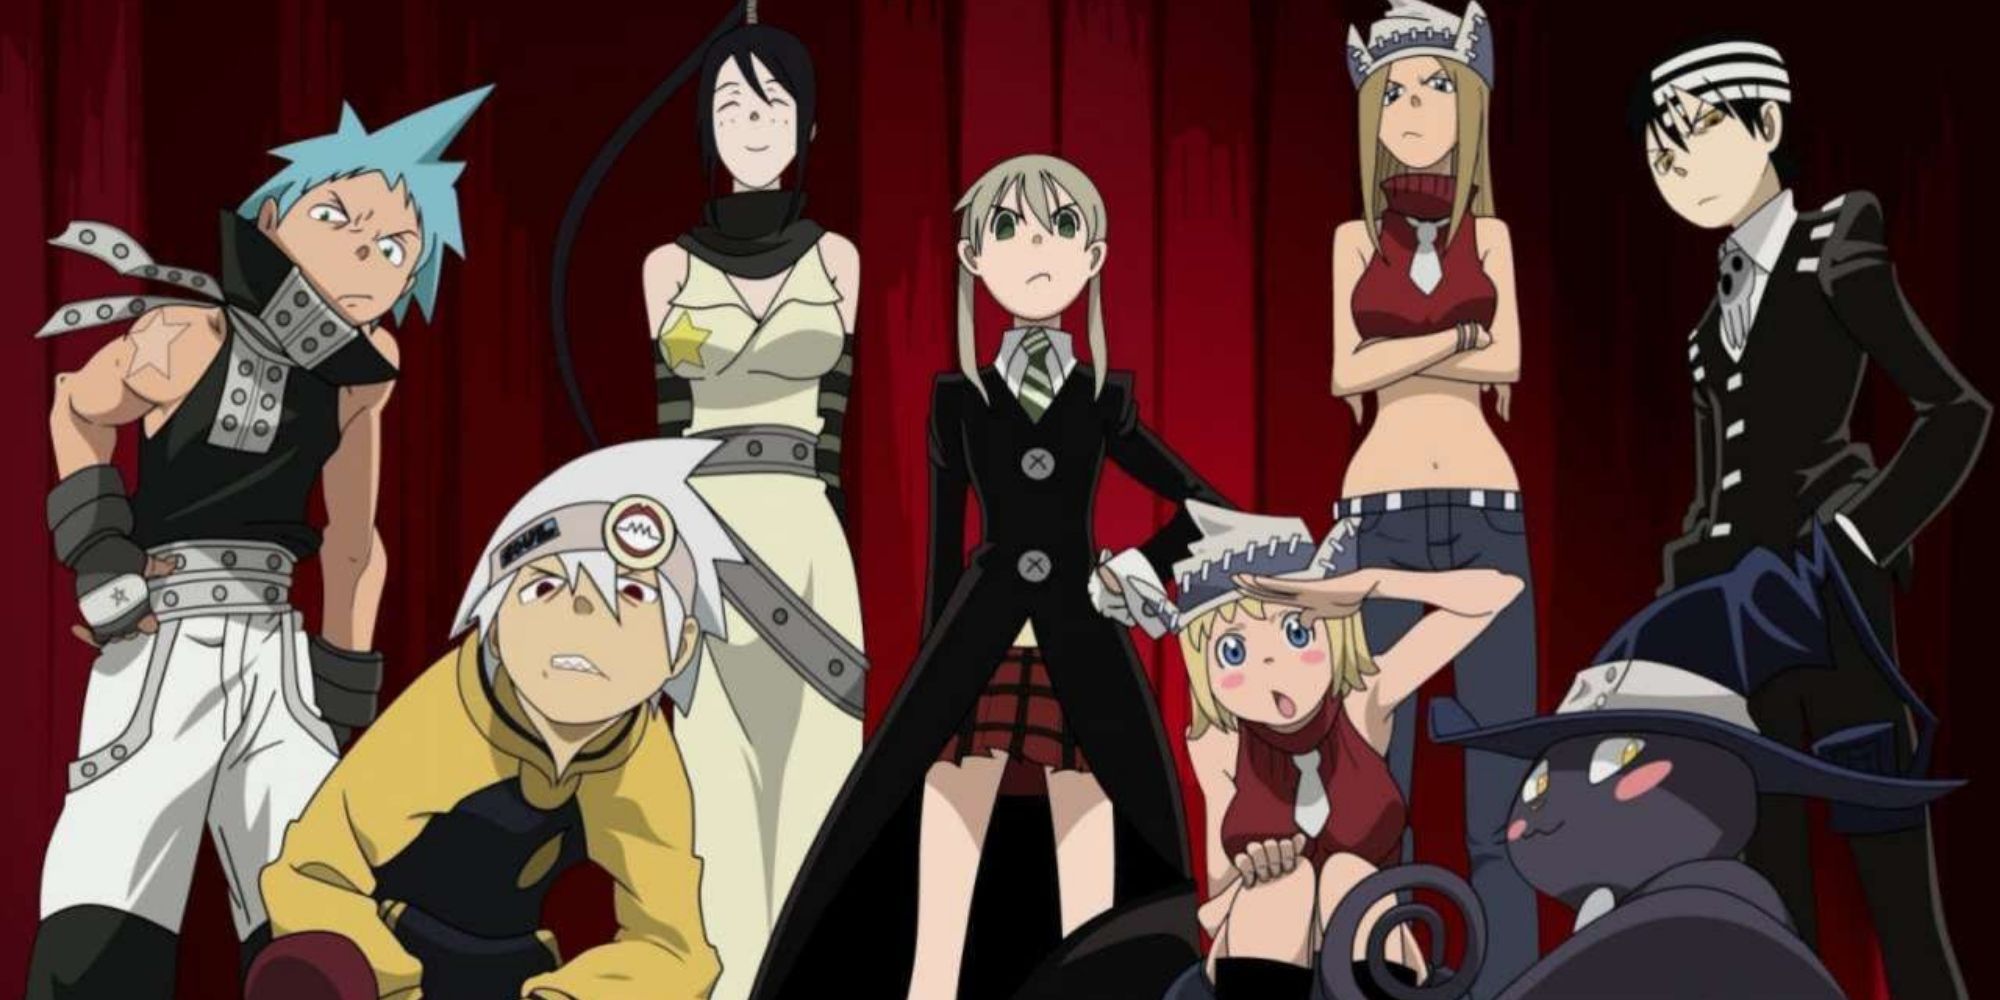 NEEDS A REBOOT There are some anime that got cut short due to budget  constraints, or the manga continued after the TV show wrapped. Soul Eater  happens to be one of these examples. Unfortunately, its rushed, nonsensical  ending put a damper on an